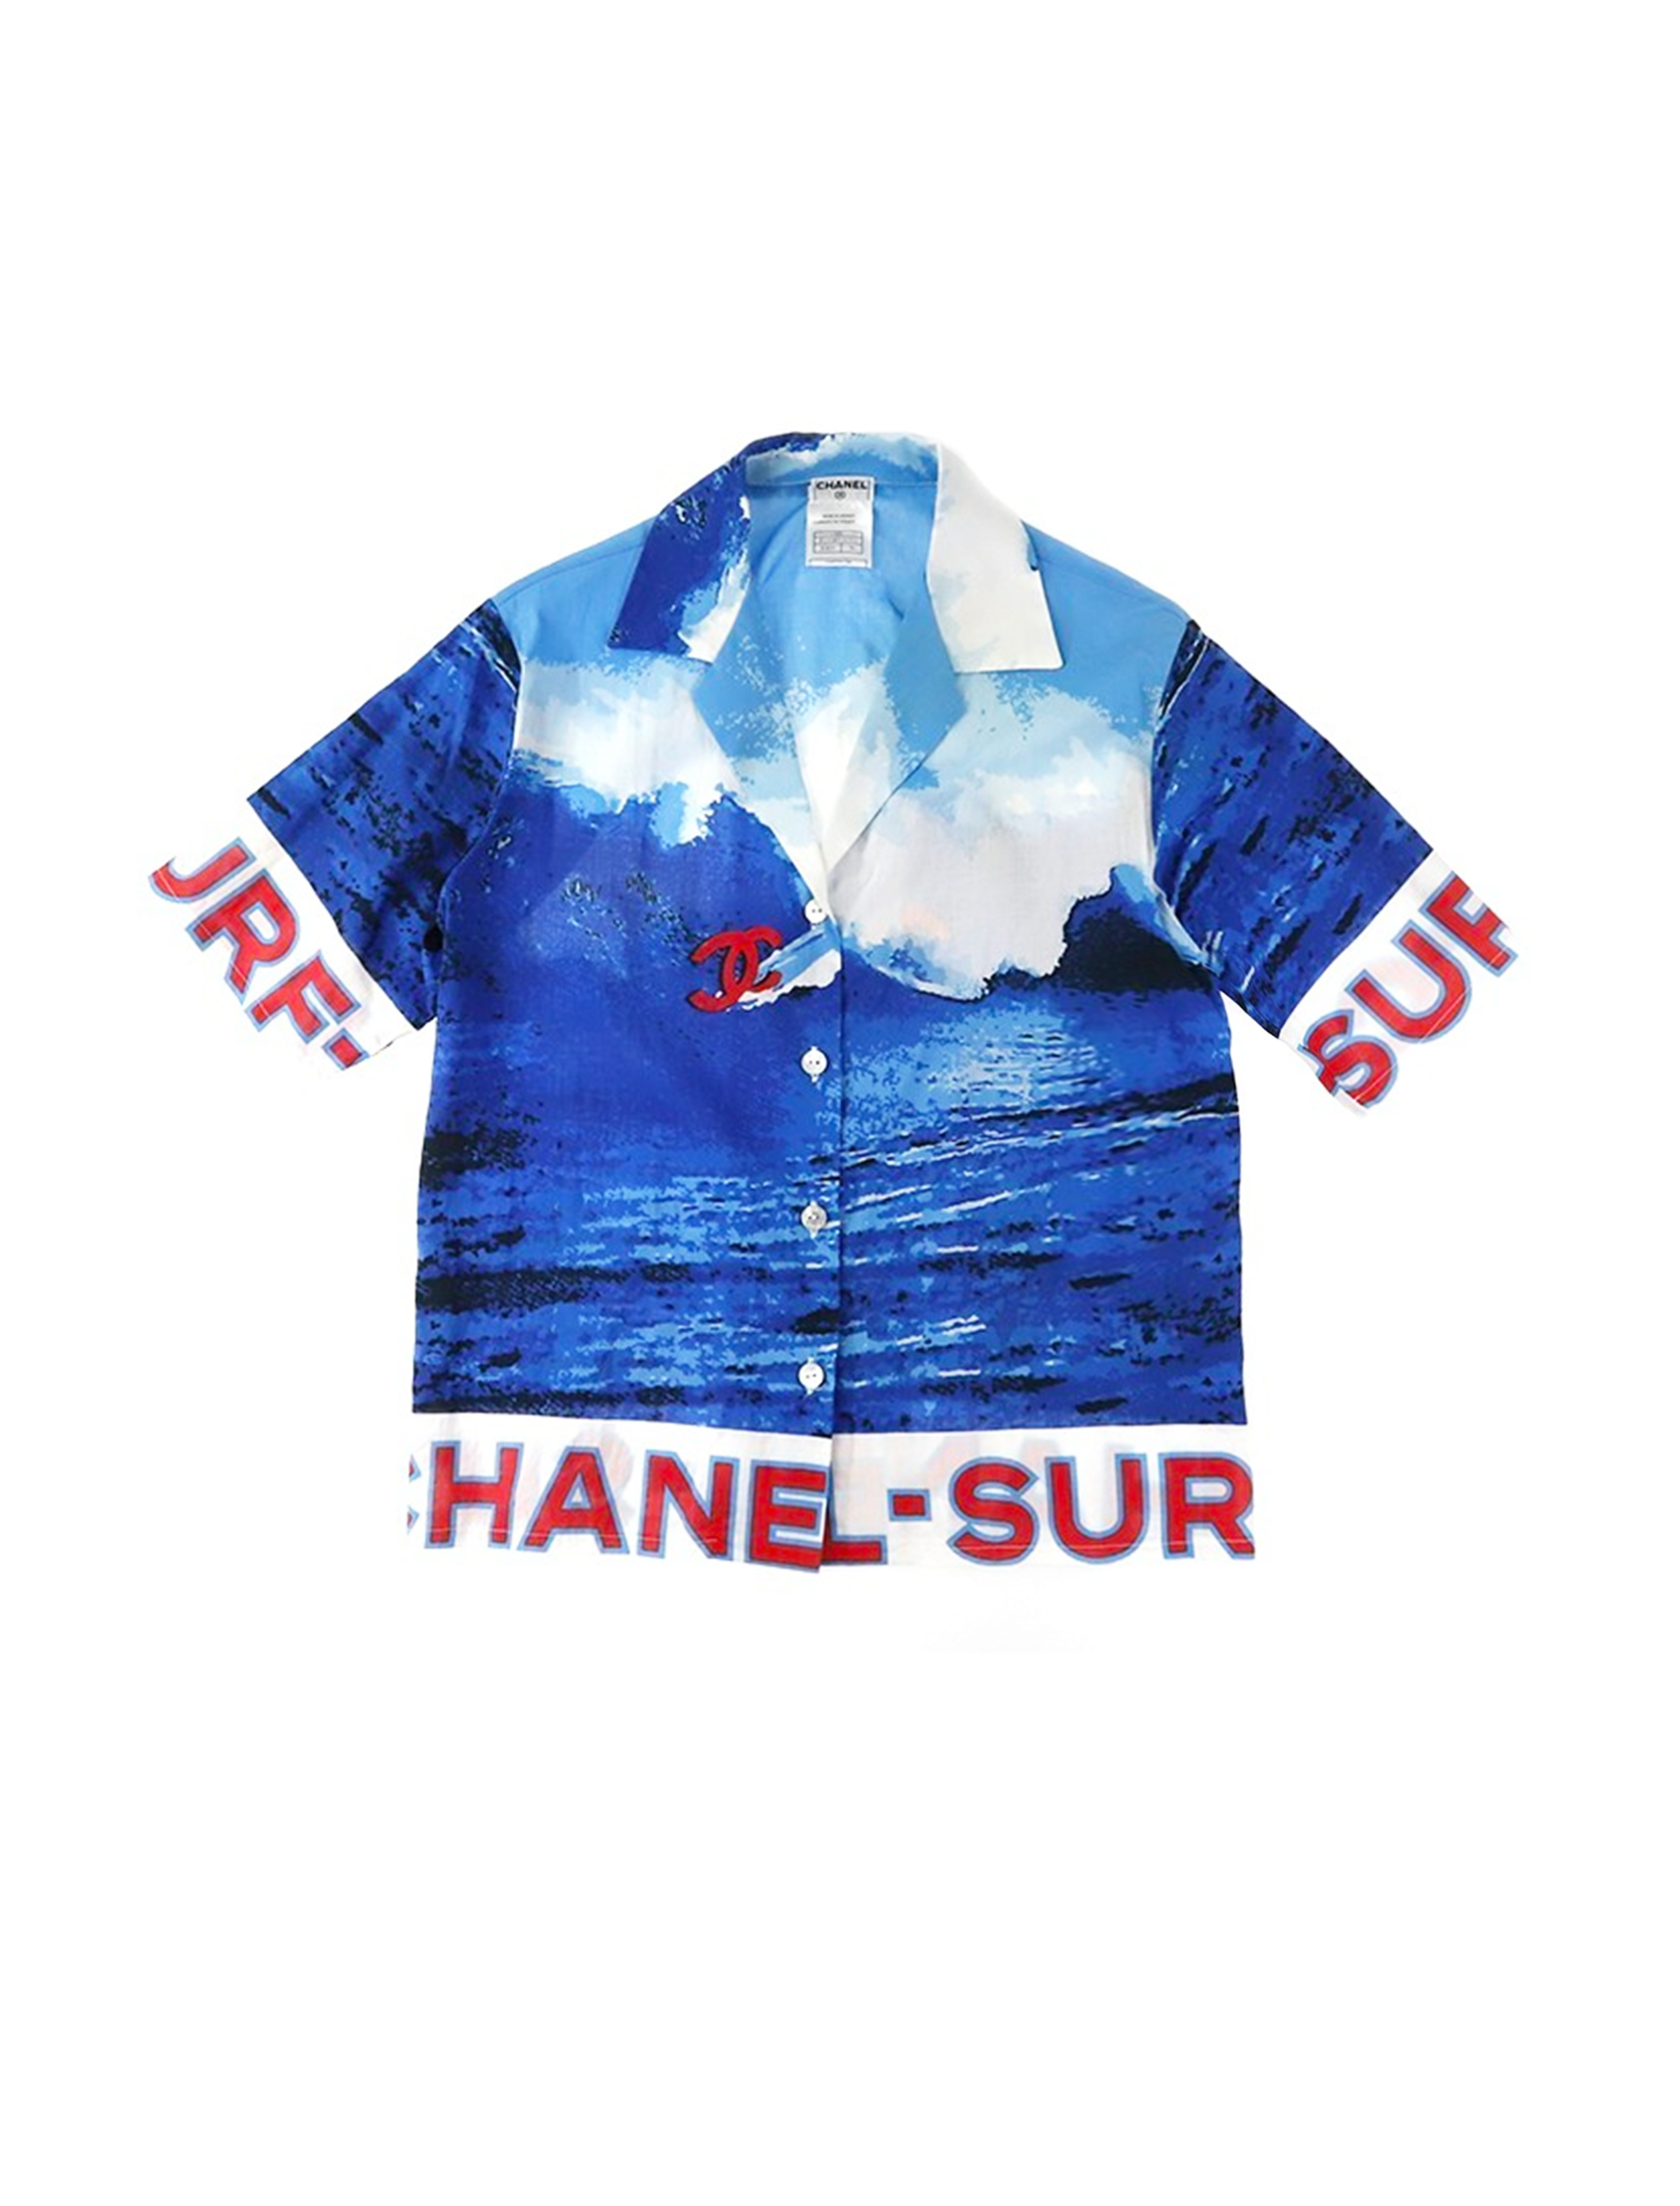 Chanel Surf 2002 SS Button-Up Short Sleeve